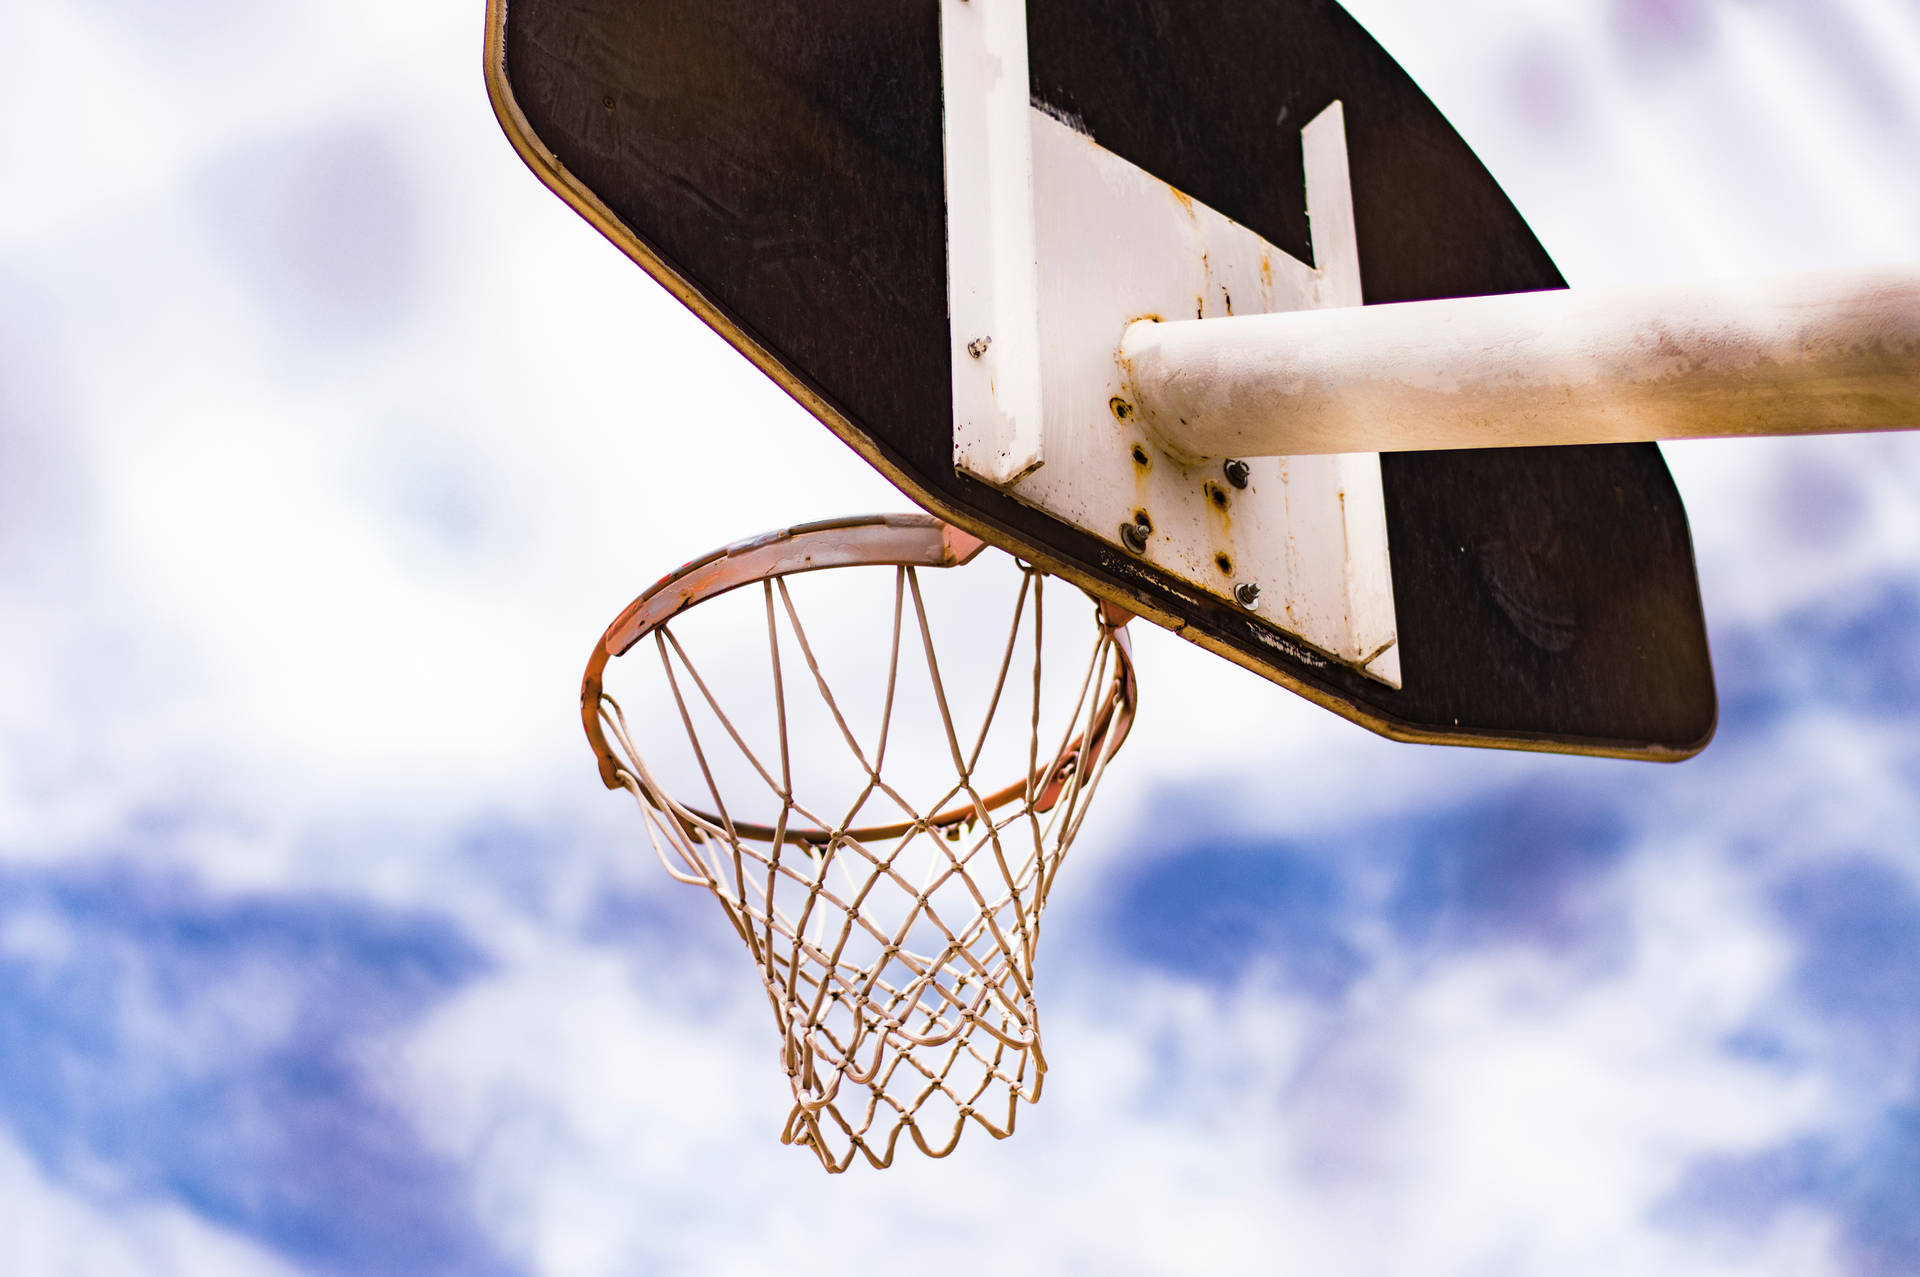 Basketball 6016X4000 Wallpaper and Background Image